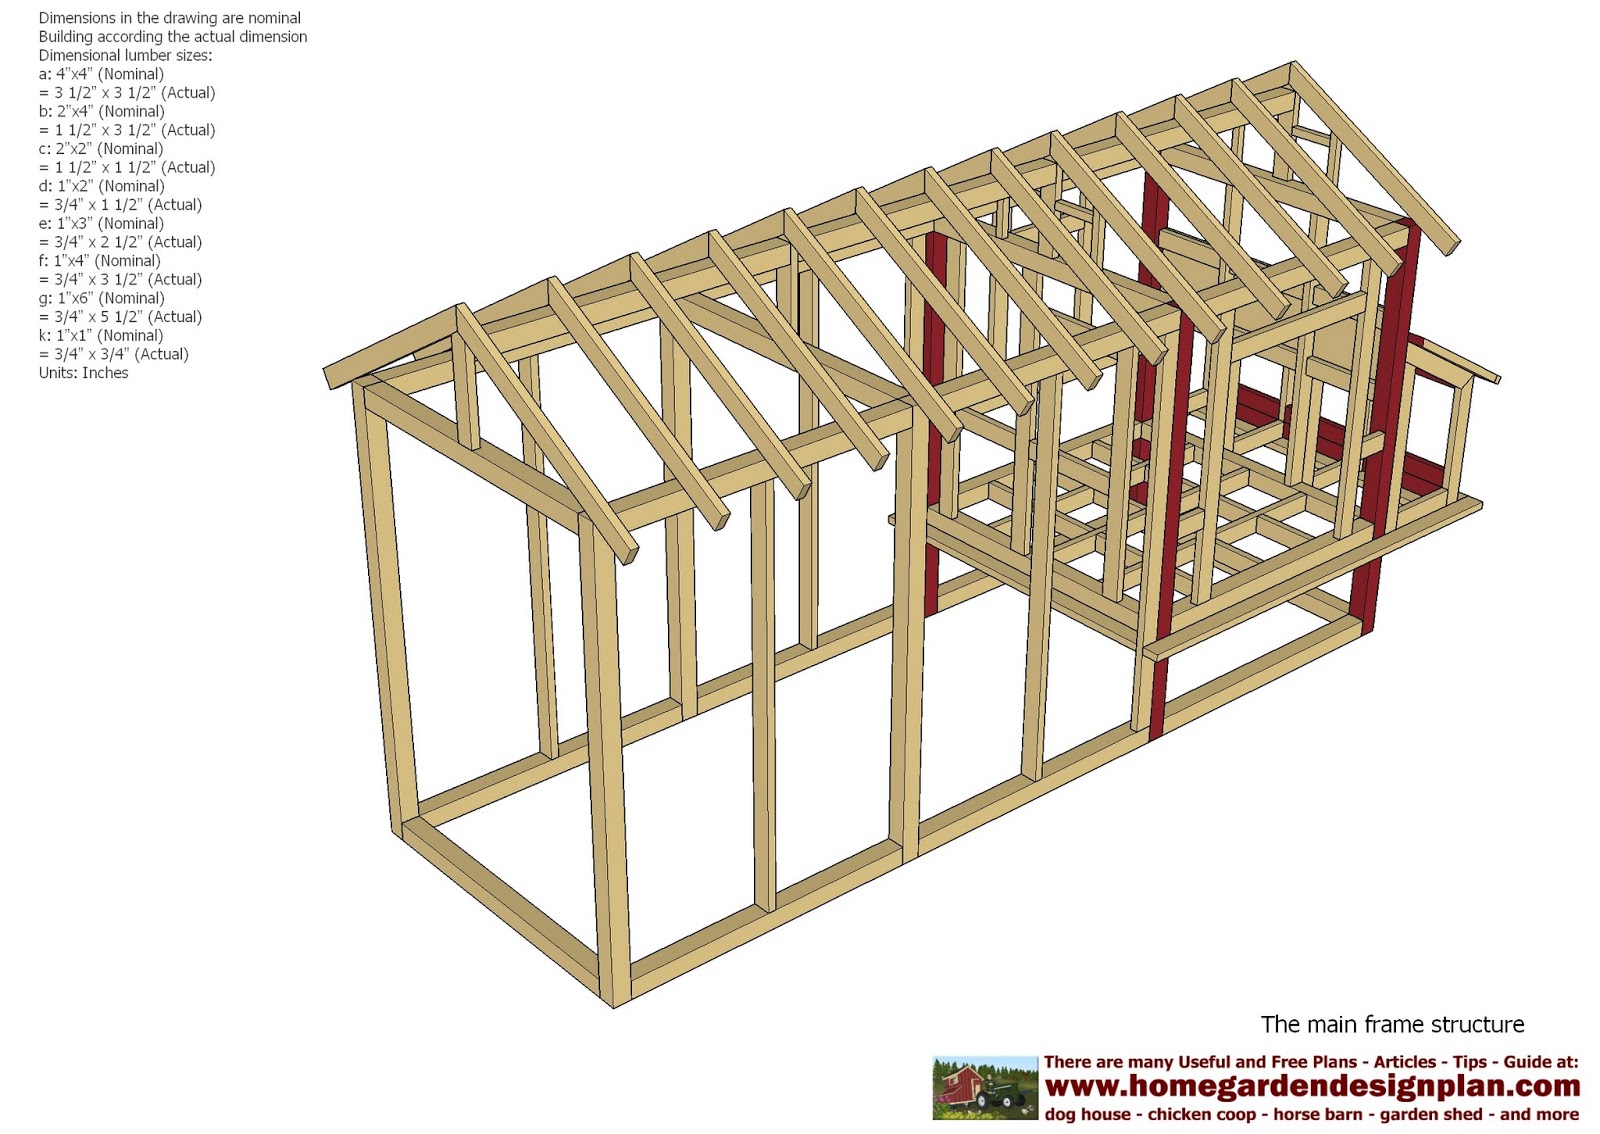 ... Chicken Coop Plans Construction - Chicken Coop Design - How To Build A